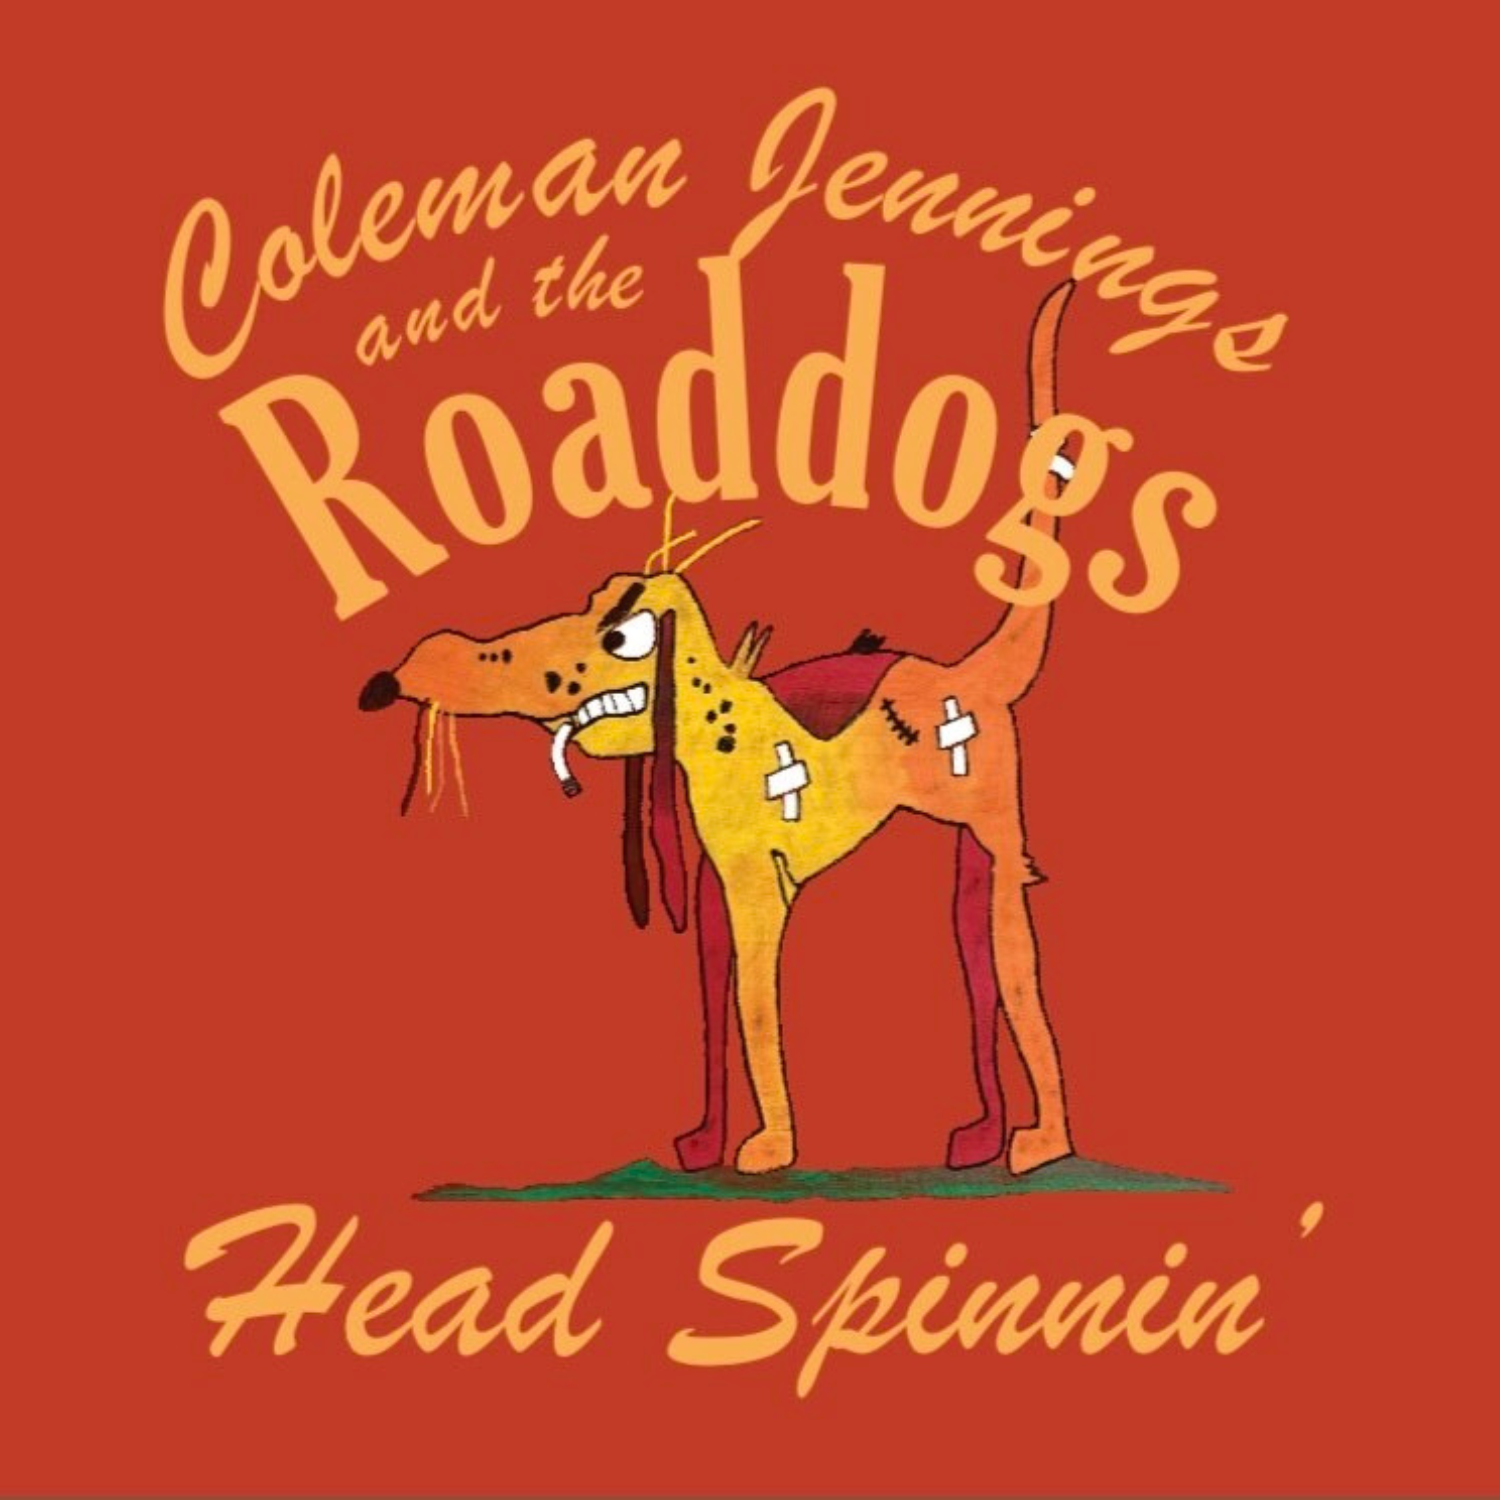 Head Spinnin'” from Coleman Jennings and the Roaddogs Out Today